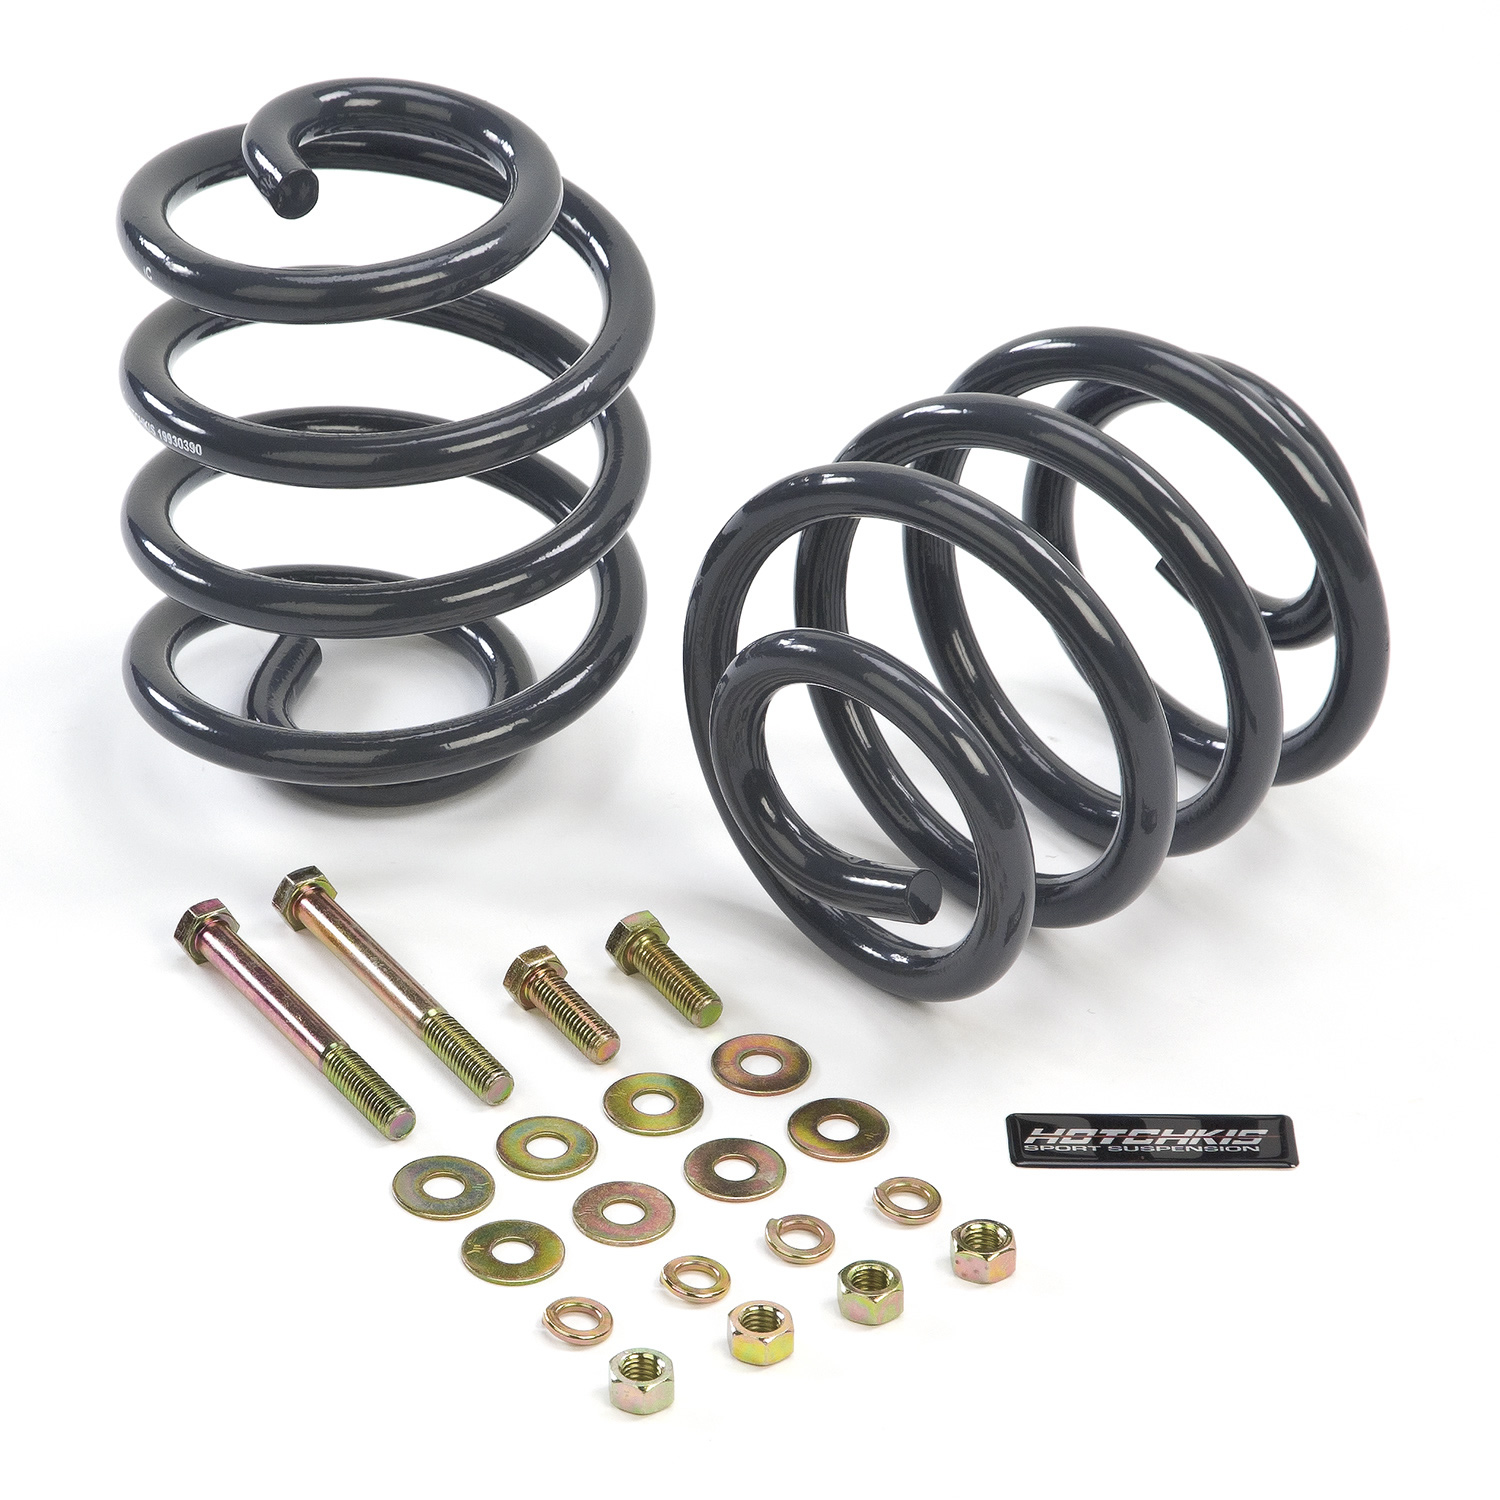 1967-72 Chevy C-10 Pickup Rear Sport Coil Springs from Hotchkis Sport Suspension